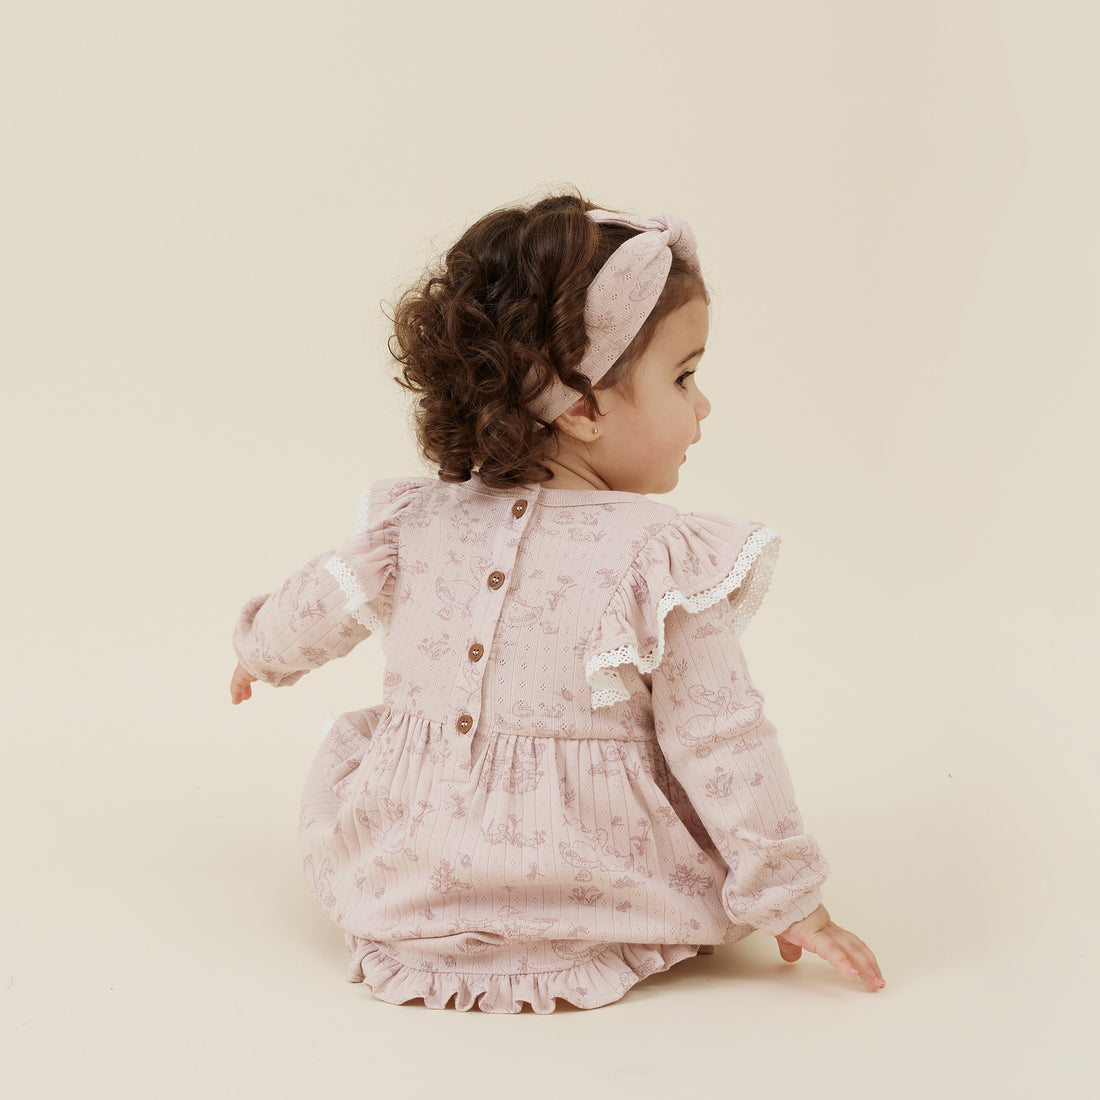 Baby Toddler Girls Pink Lace Duck Family Ruffle Dress